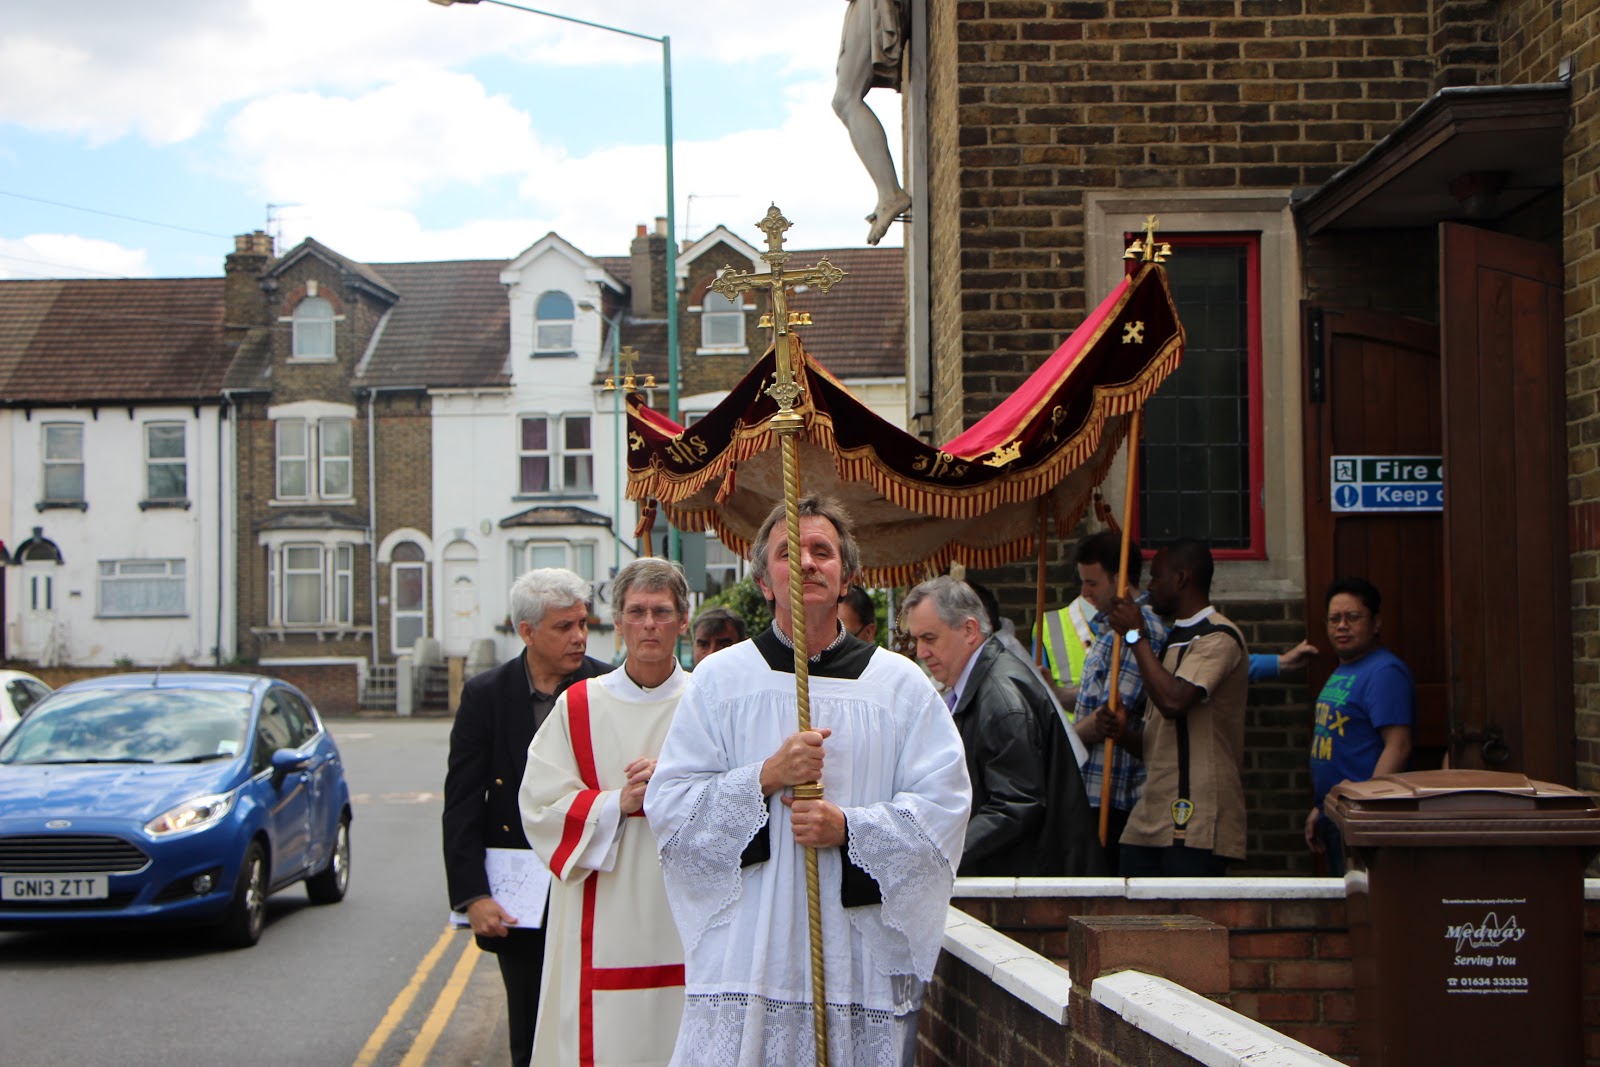 Our Lady of Gillingham: Corpus Christi Procession 2013